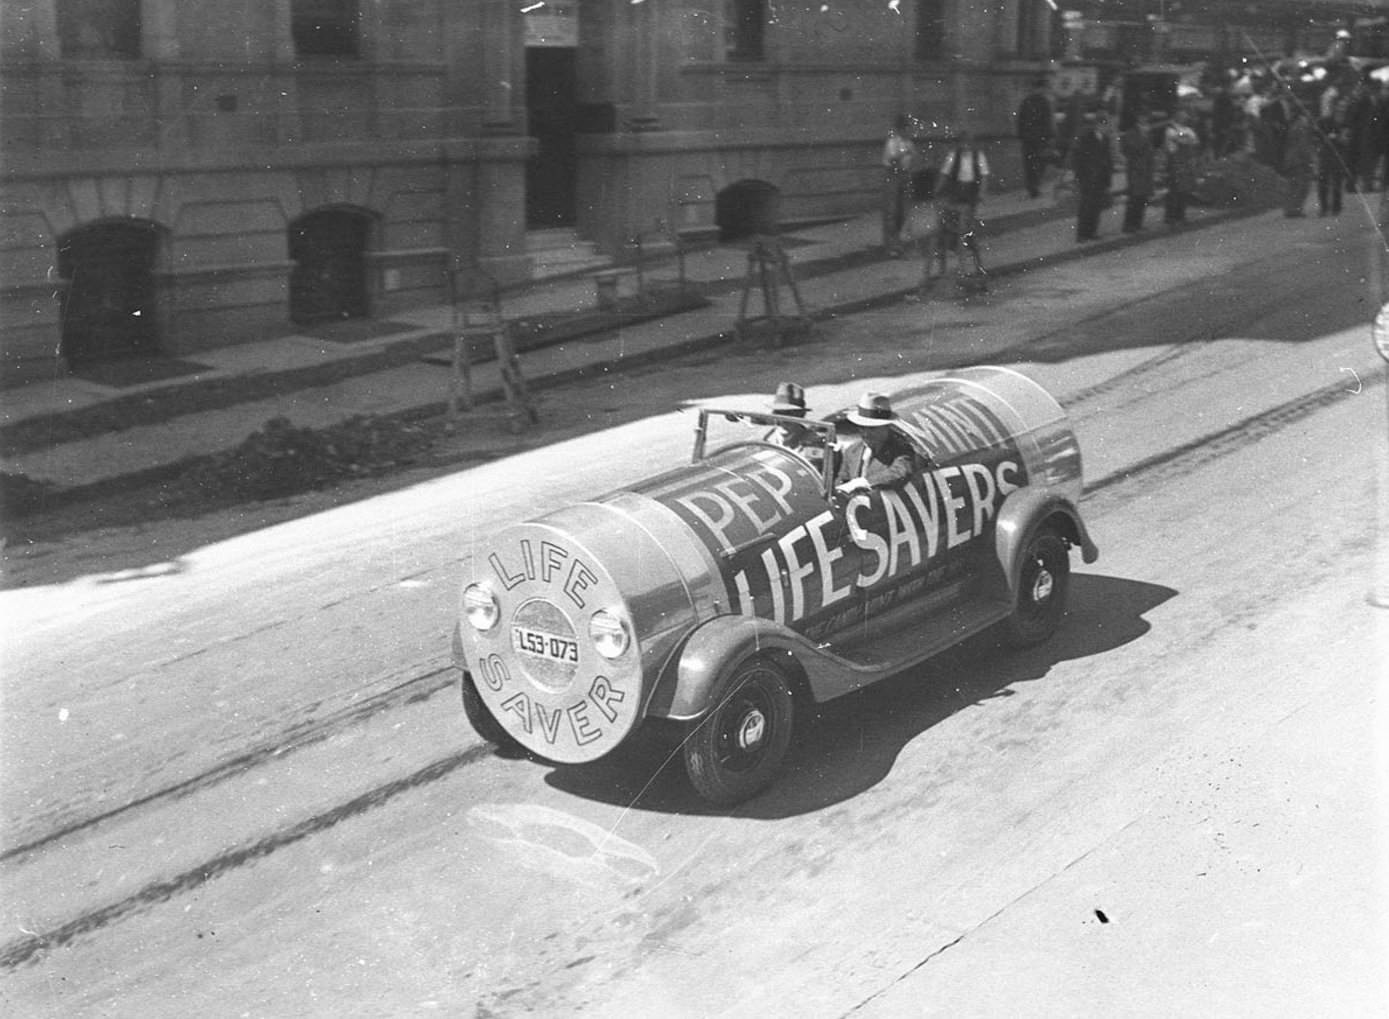 The lifesavers car in the US in 1934.